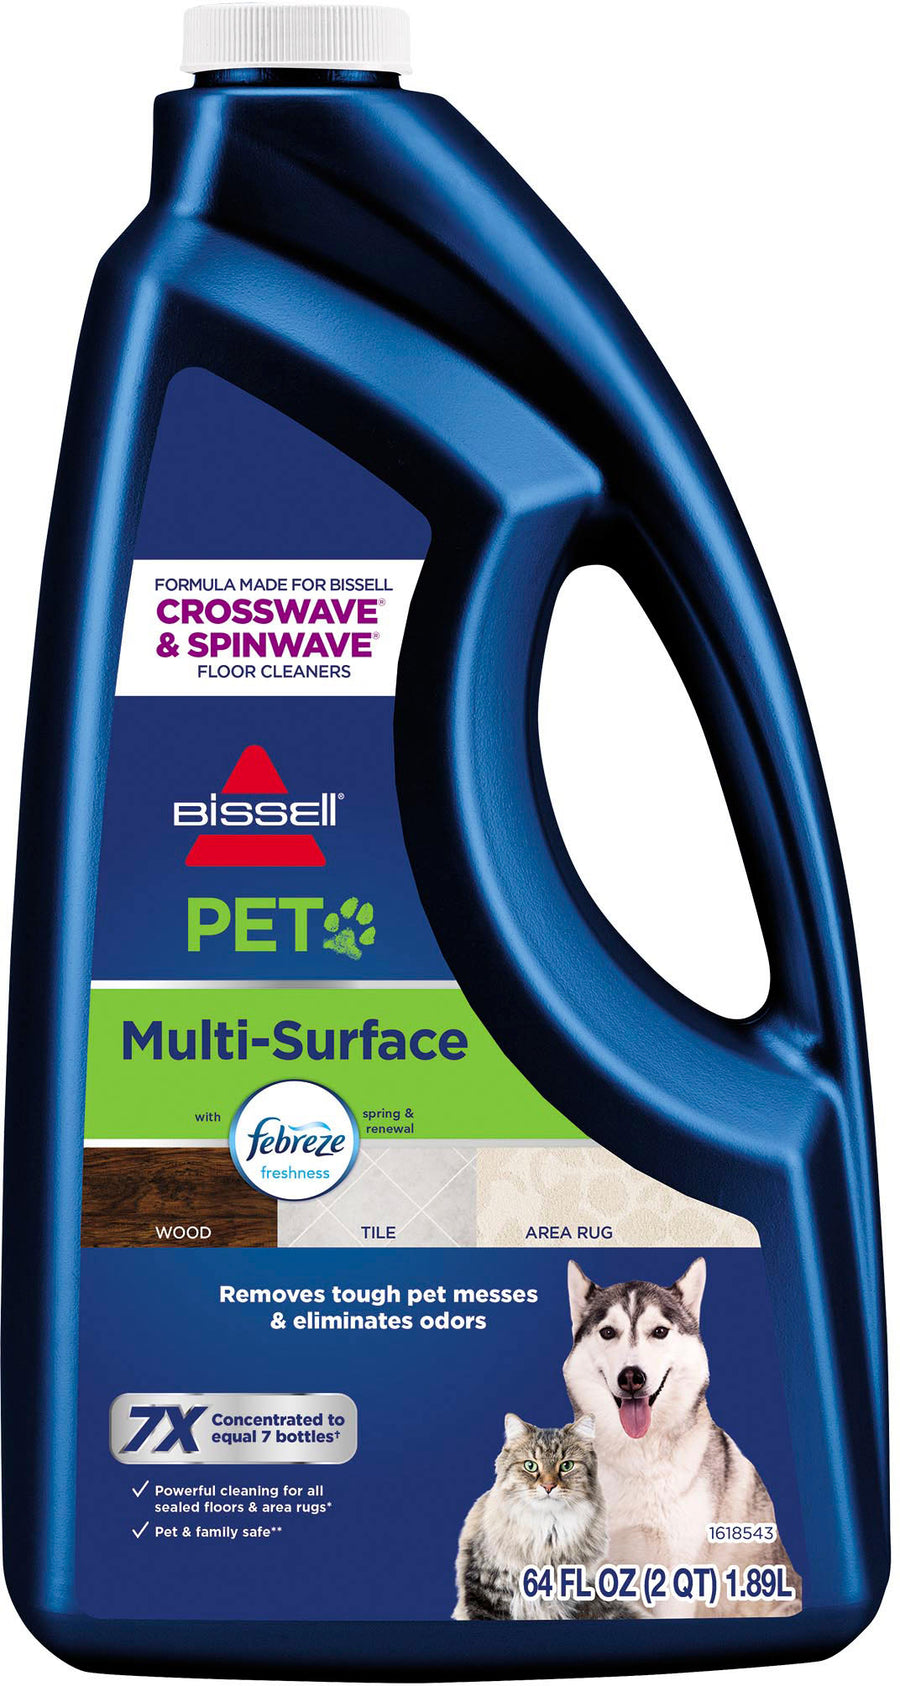 BISSELL - PET Multi-Surface with Febreze Formula_0